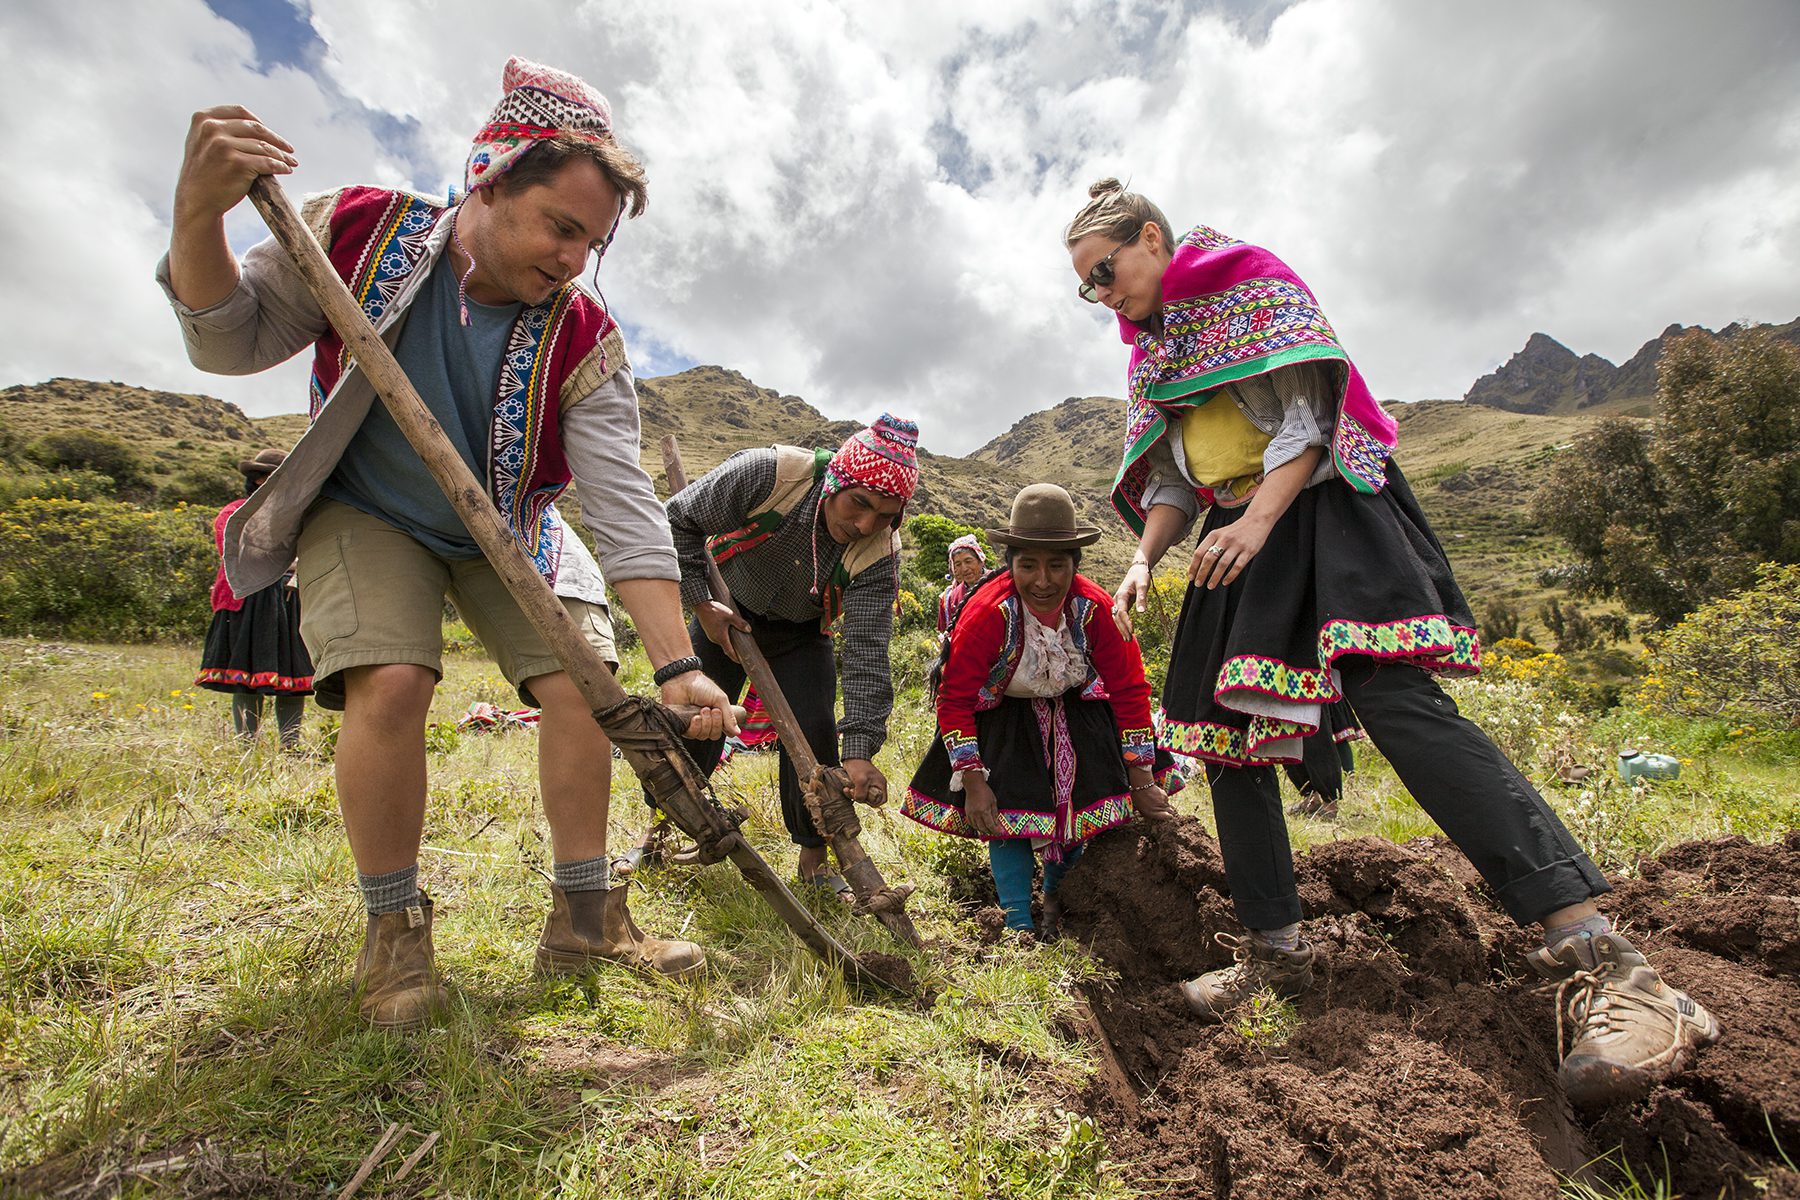 The chaquitaclla, also known as the foot plow, was one of the most important farming tools of the Andean world | Community-Based Tourism in the Sacred Valley with RESPONSible Travel Peru - Experience a Day of Fellowship with an Andean Community